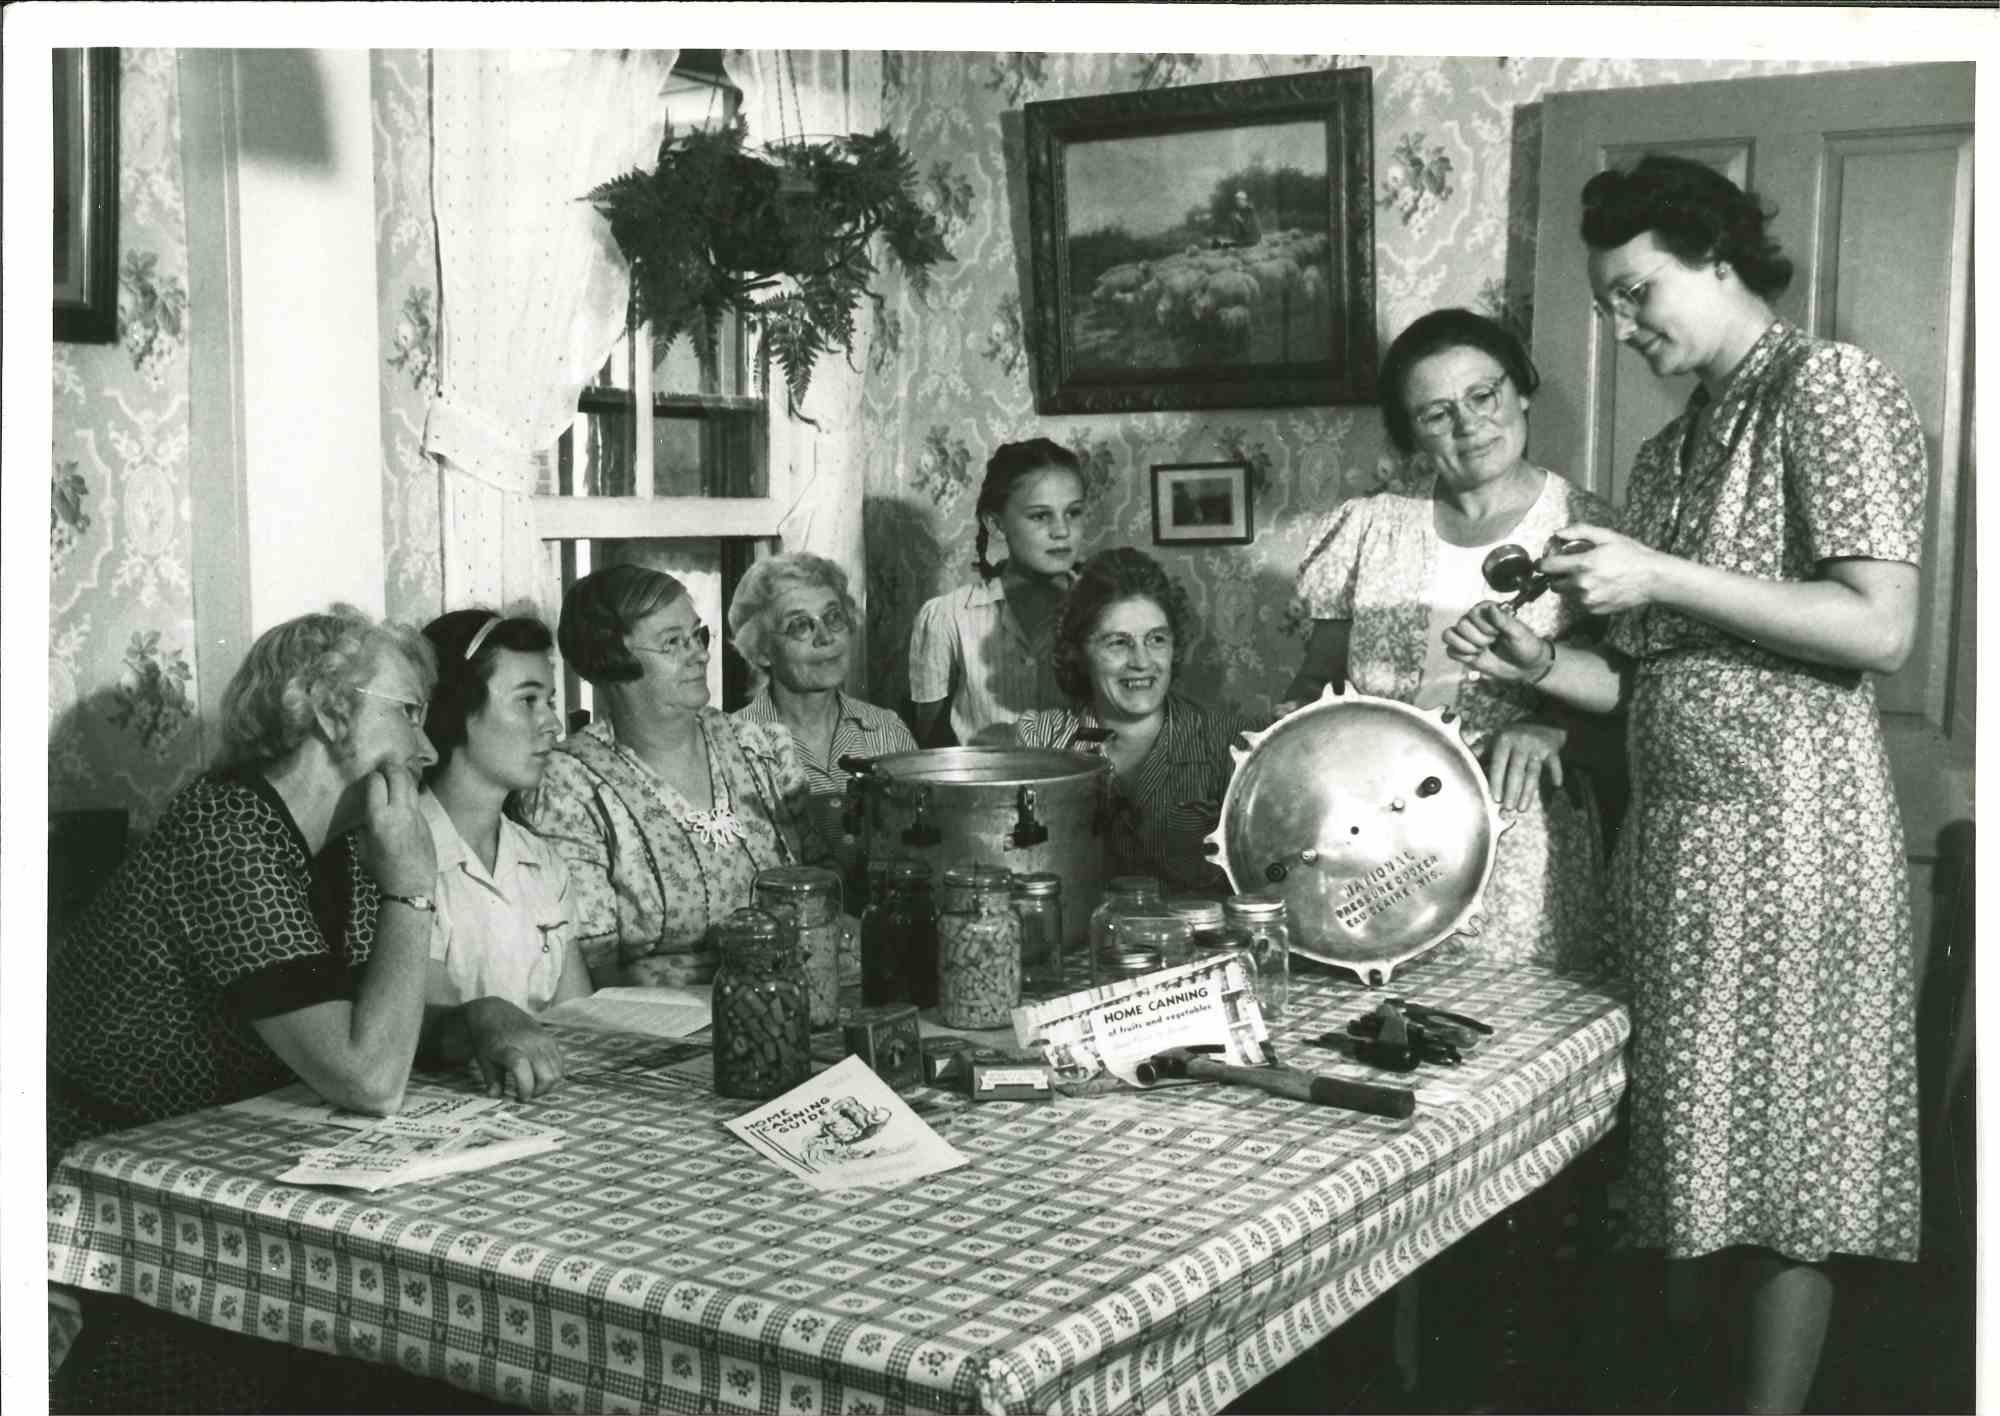 Unknown Figurative Photograph - Home Demonstration - American Vintage Photograph - Mid 20th Century